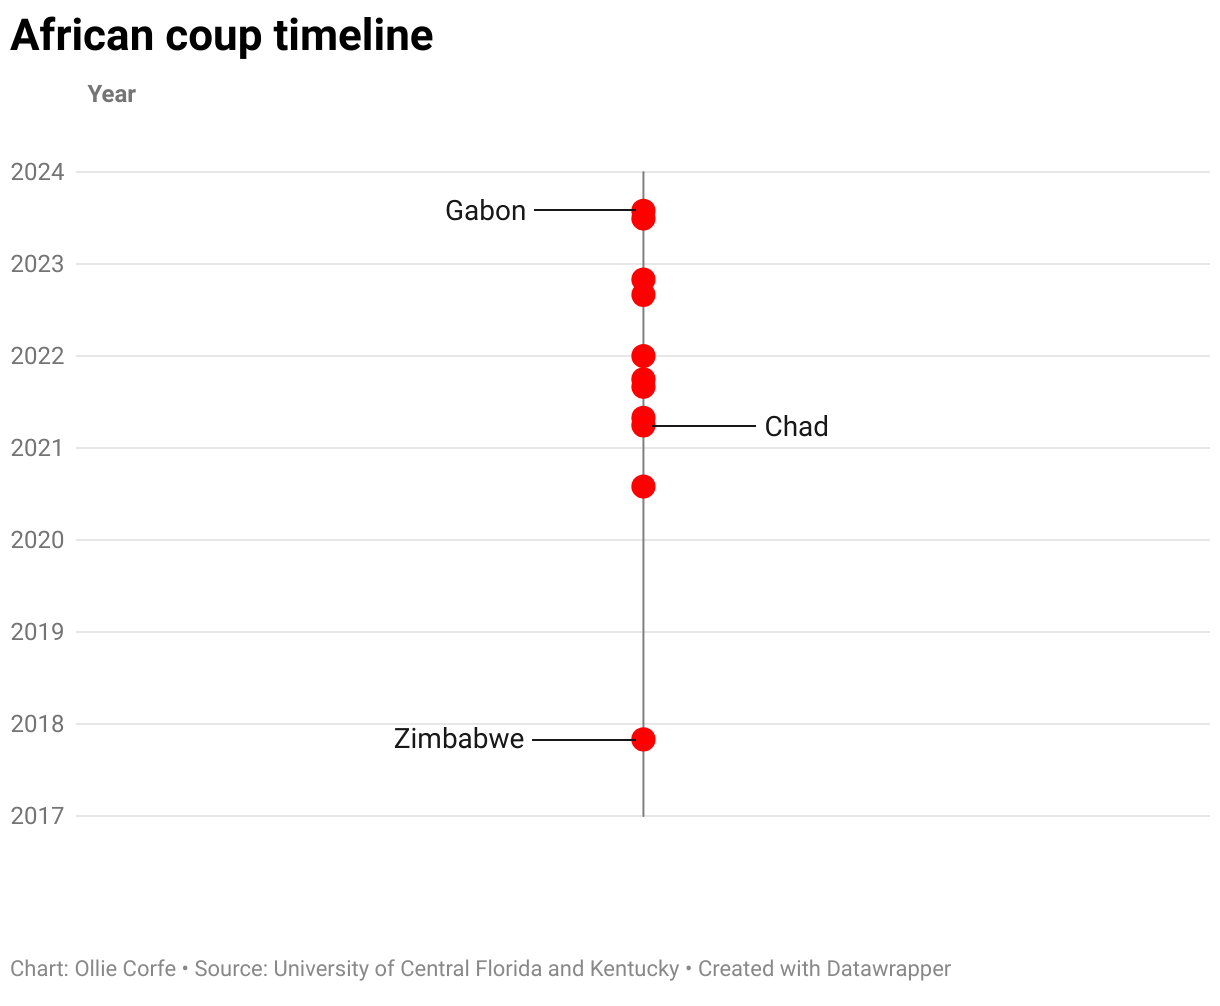 Timeline of African coups.